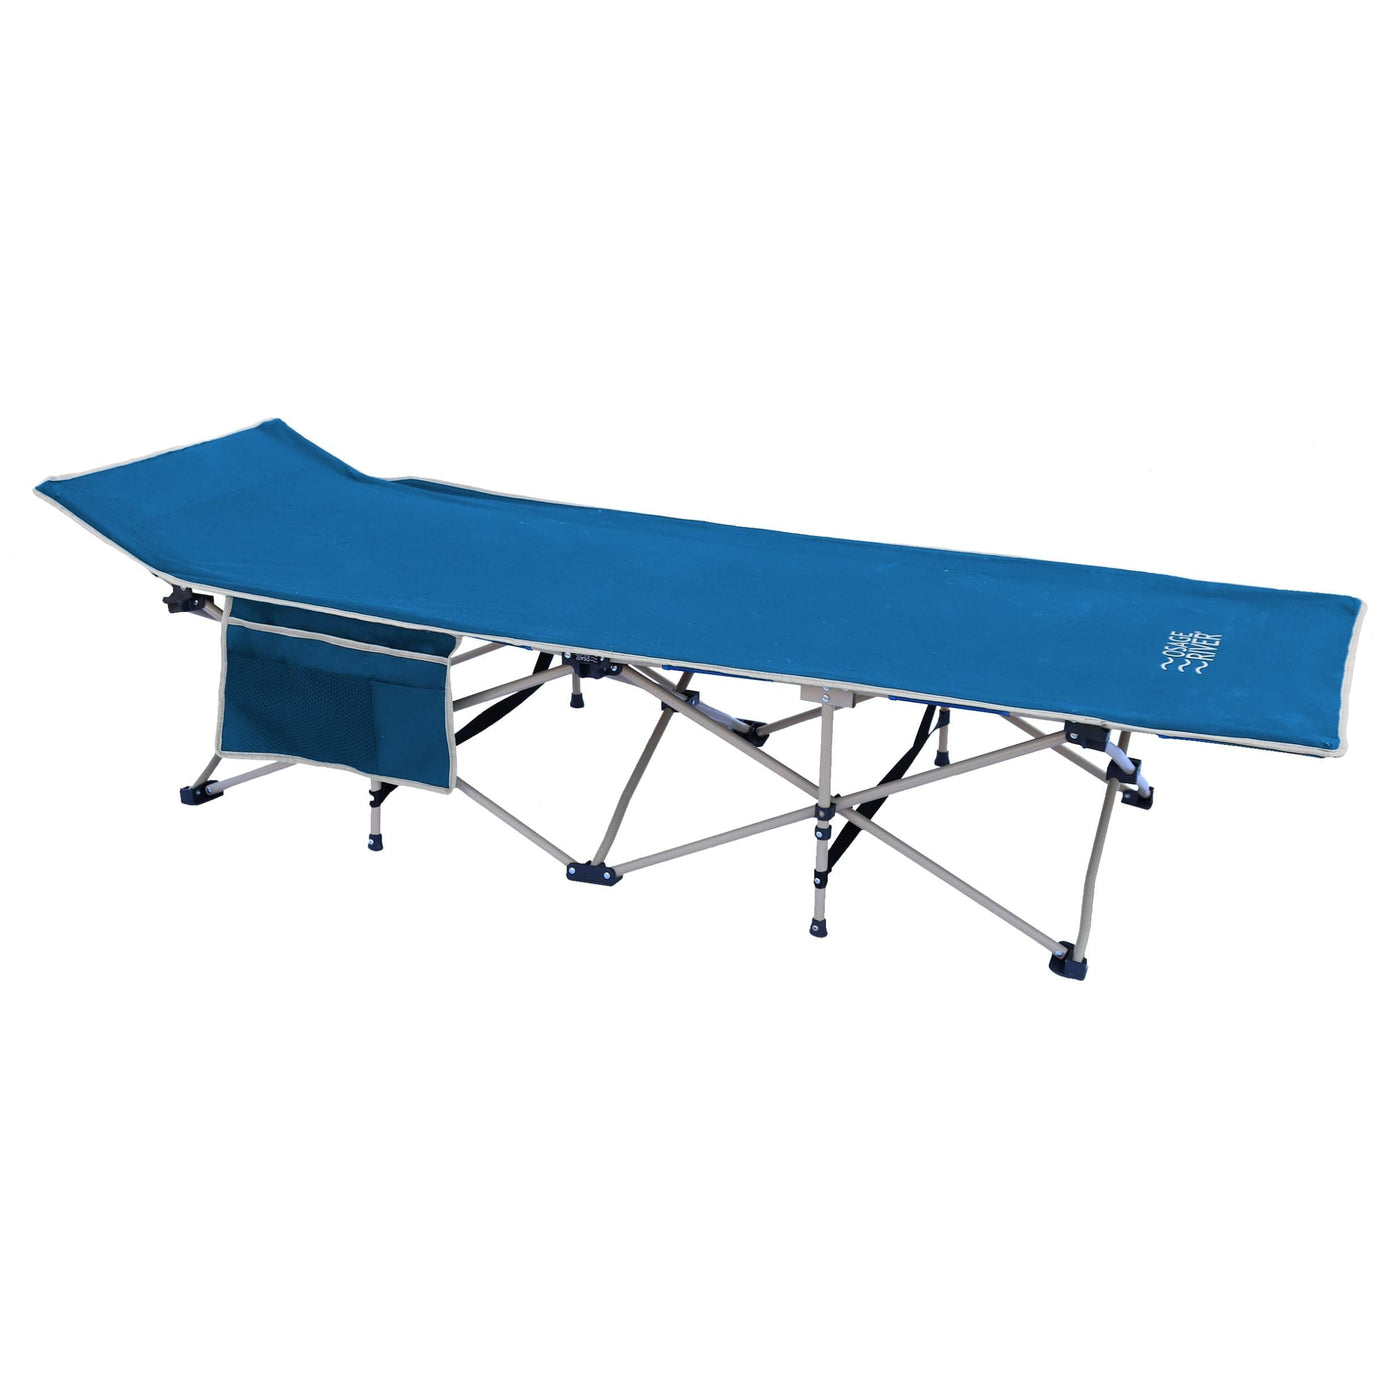 Osage River Osage River 300LBS Folding Camp Cot with Pocket - Blue Camping And Outdoor